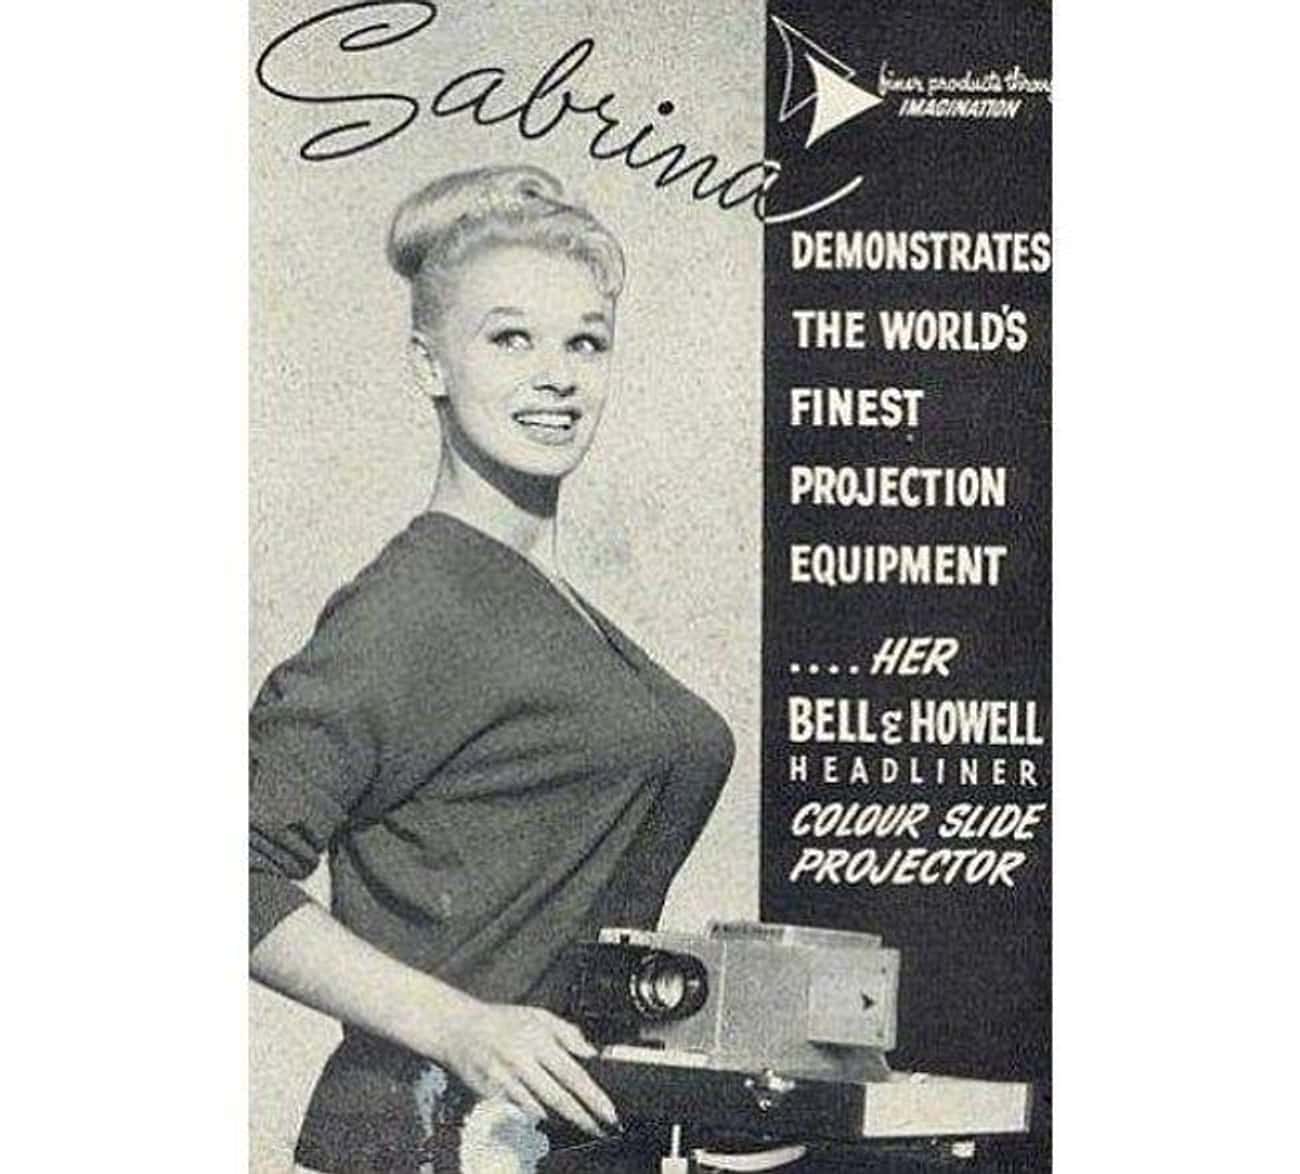 'The World's Finest Projection Equipment'